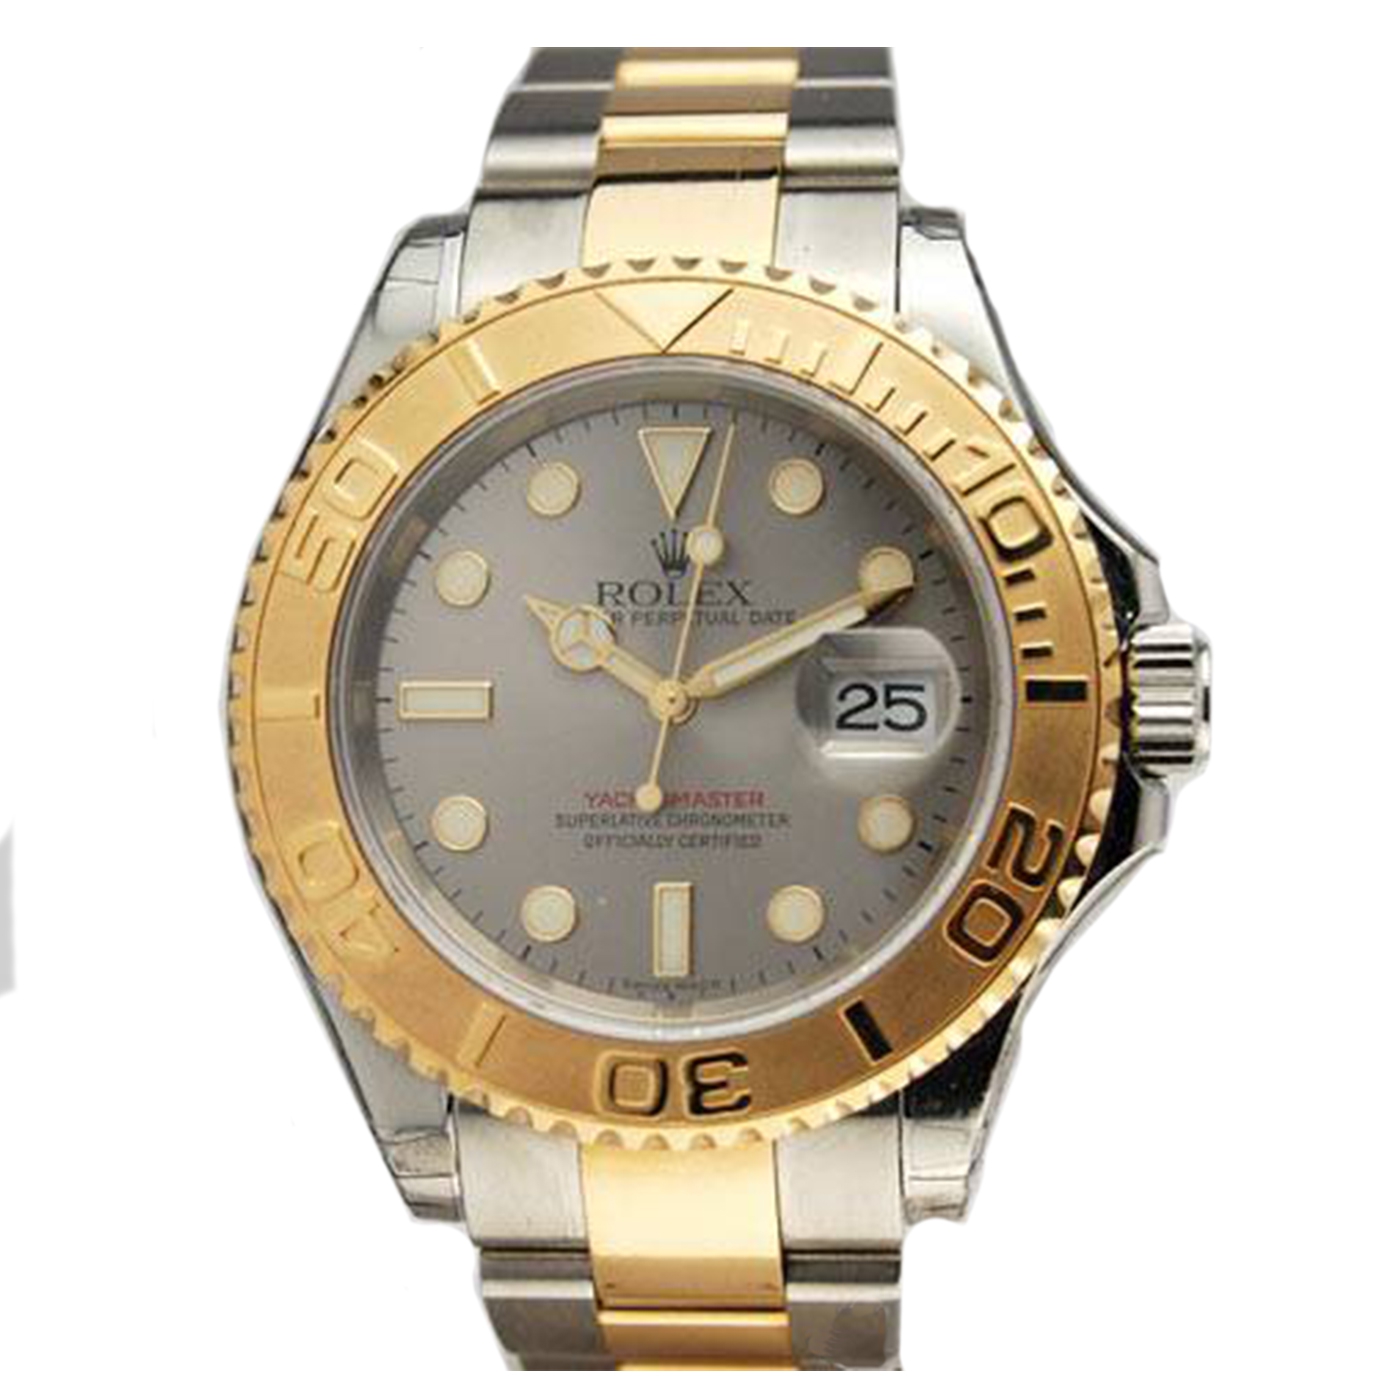 Rolex Yacht Master Stainless Steel and 18KYG 16623 Mens 